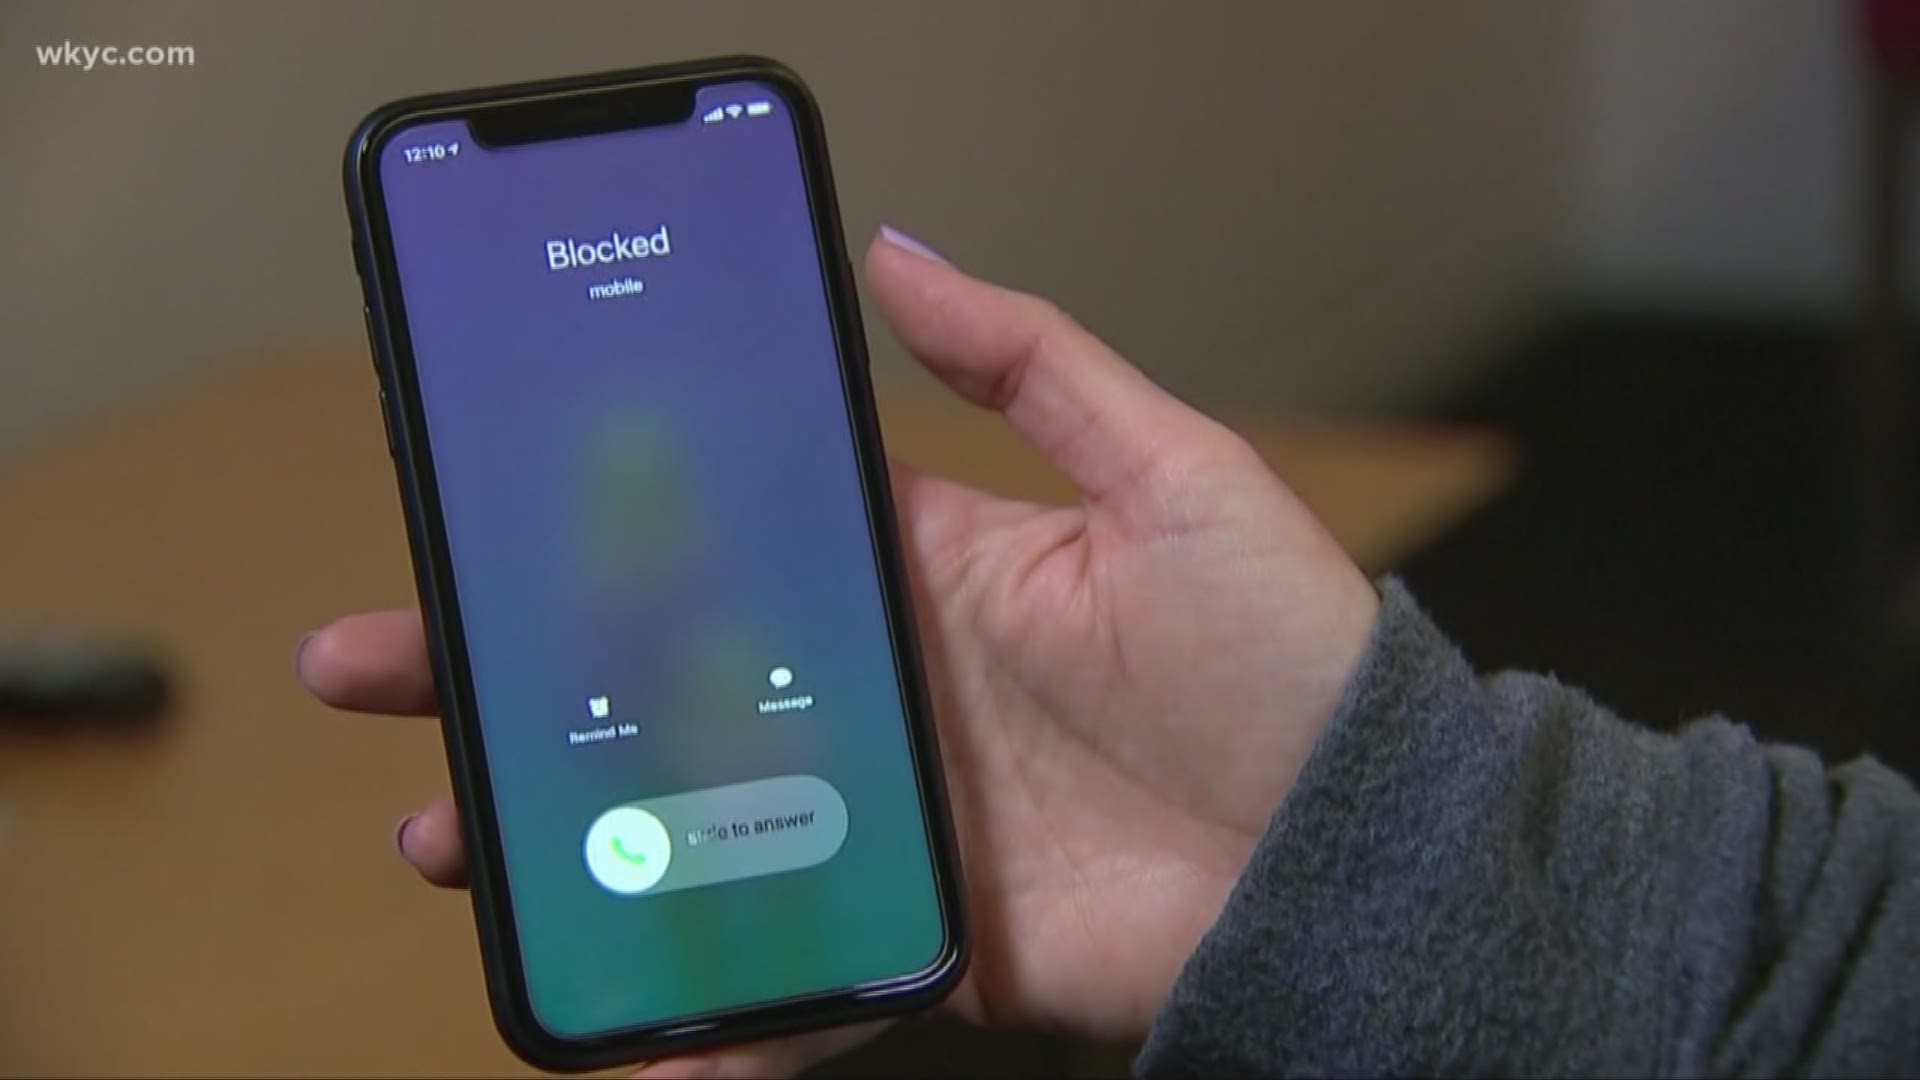 Everyone finds them annoying, but finally, a crackdown on robocalls is coming thanks to a new partnership.